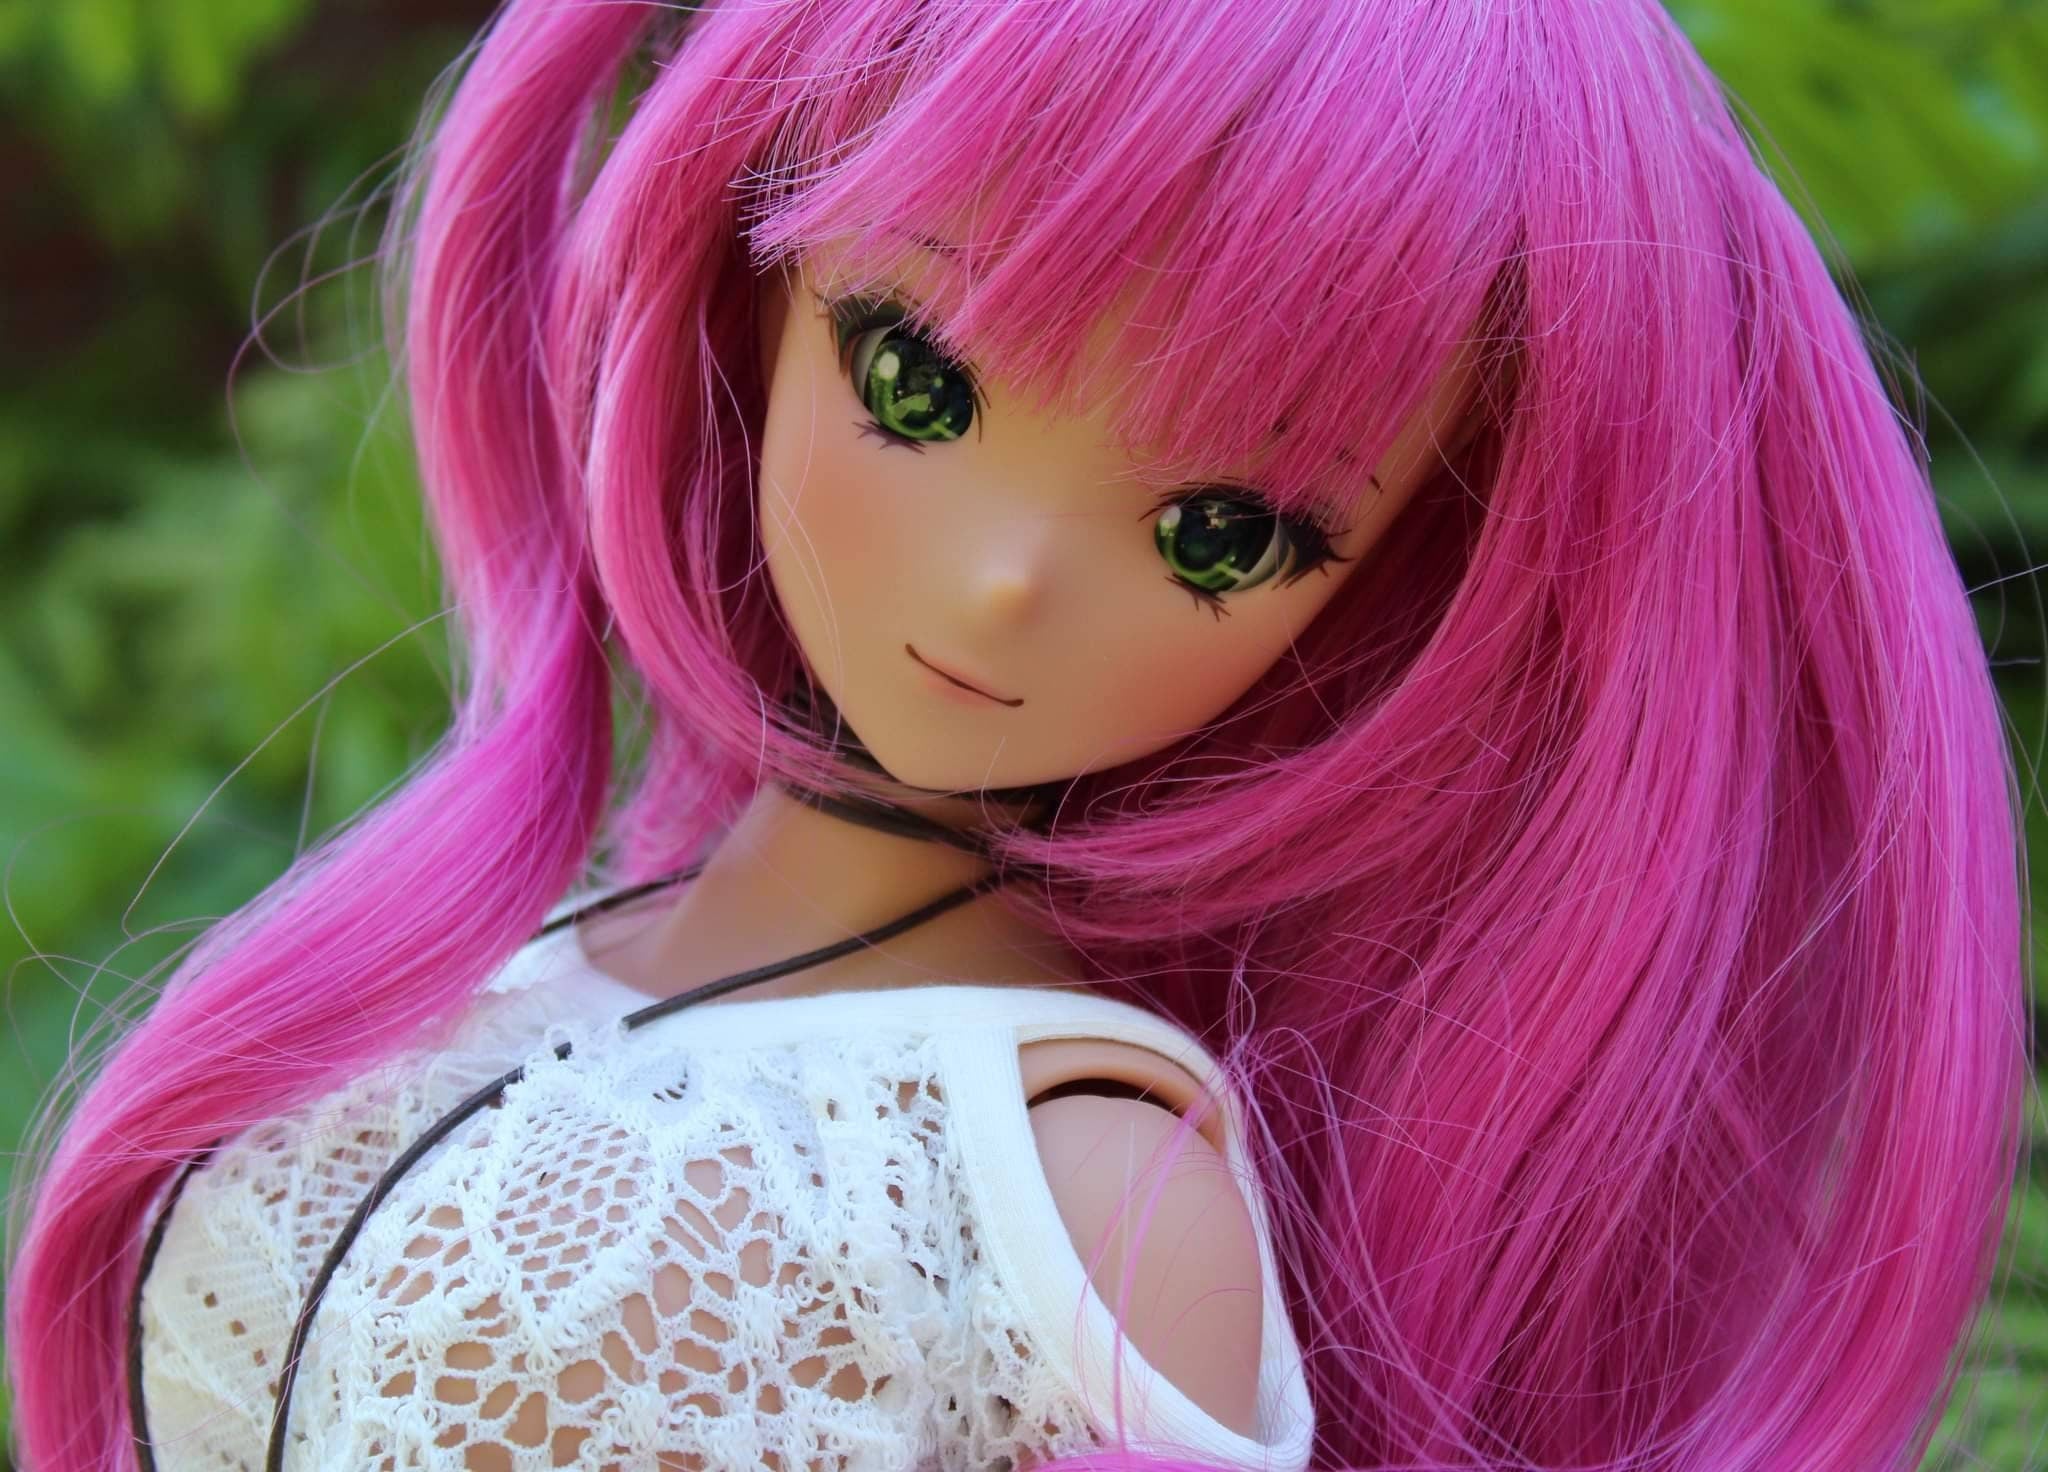 Custom doll WIG for Smart Dolls- Heat Safe - Tangle Resistant- 8.5" head size of Bjd, SD, Dollfie Dream dolls  Hot Pink  anime Limited